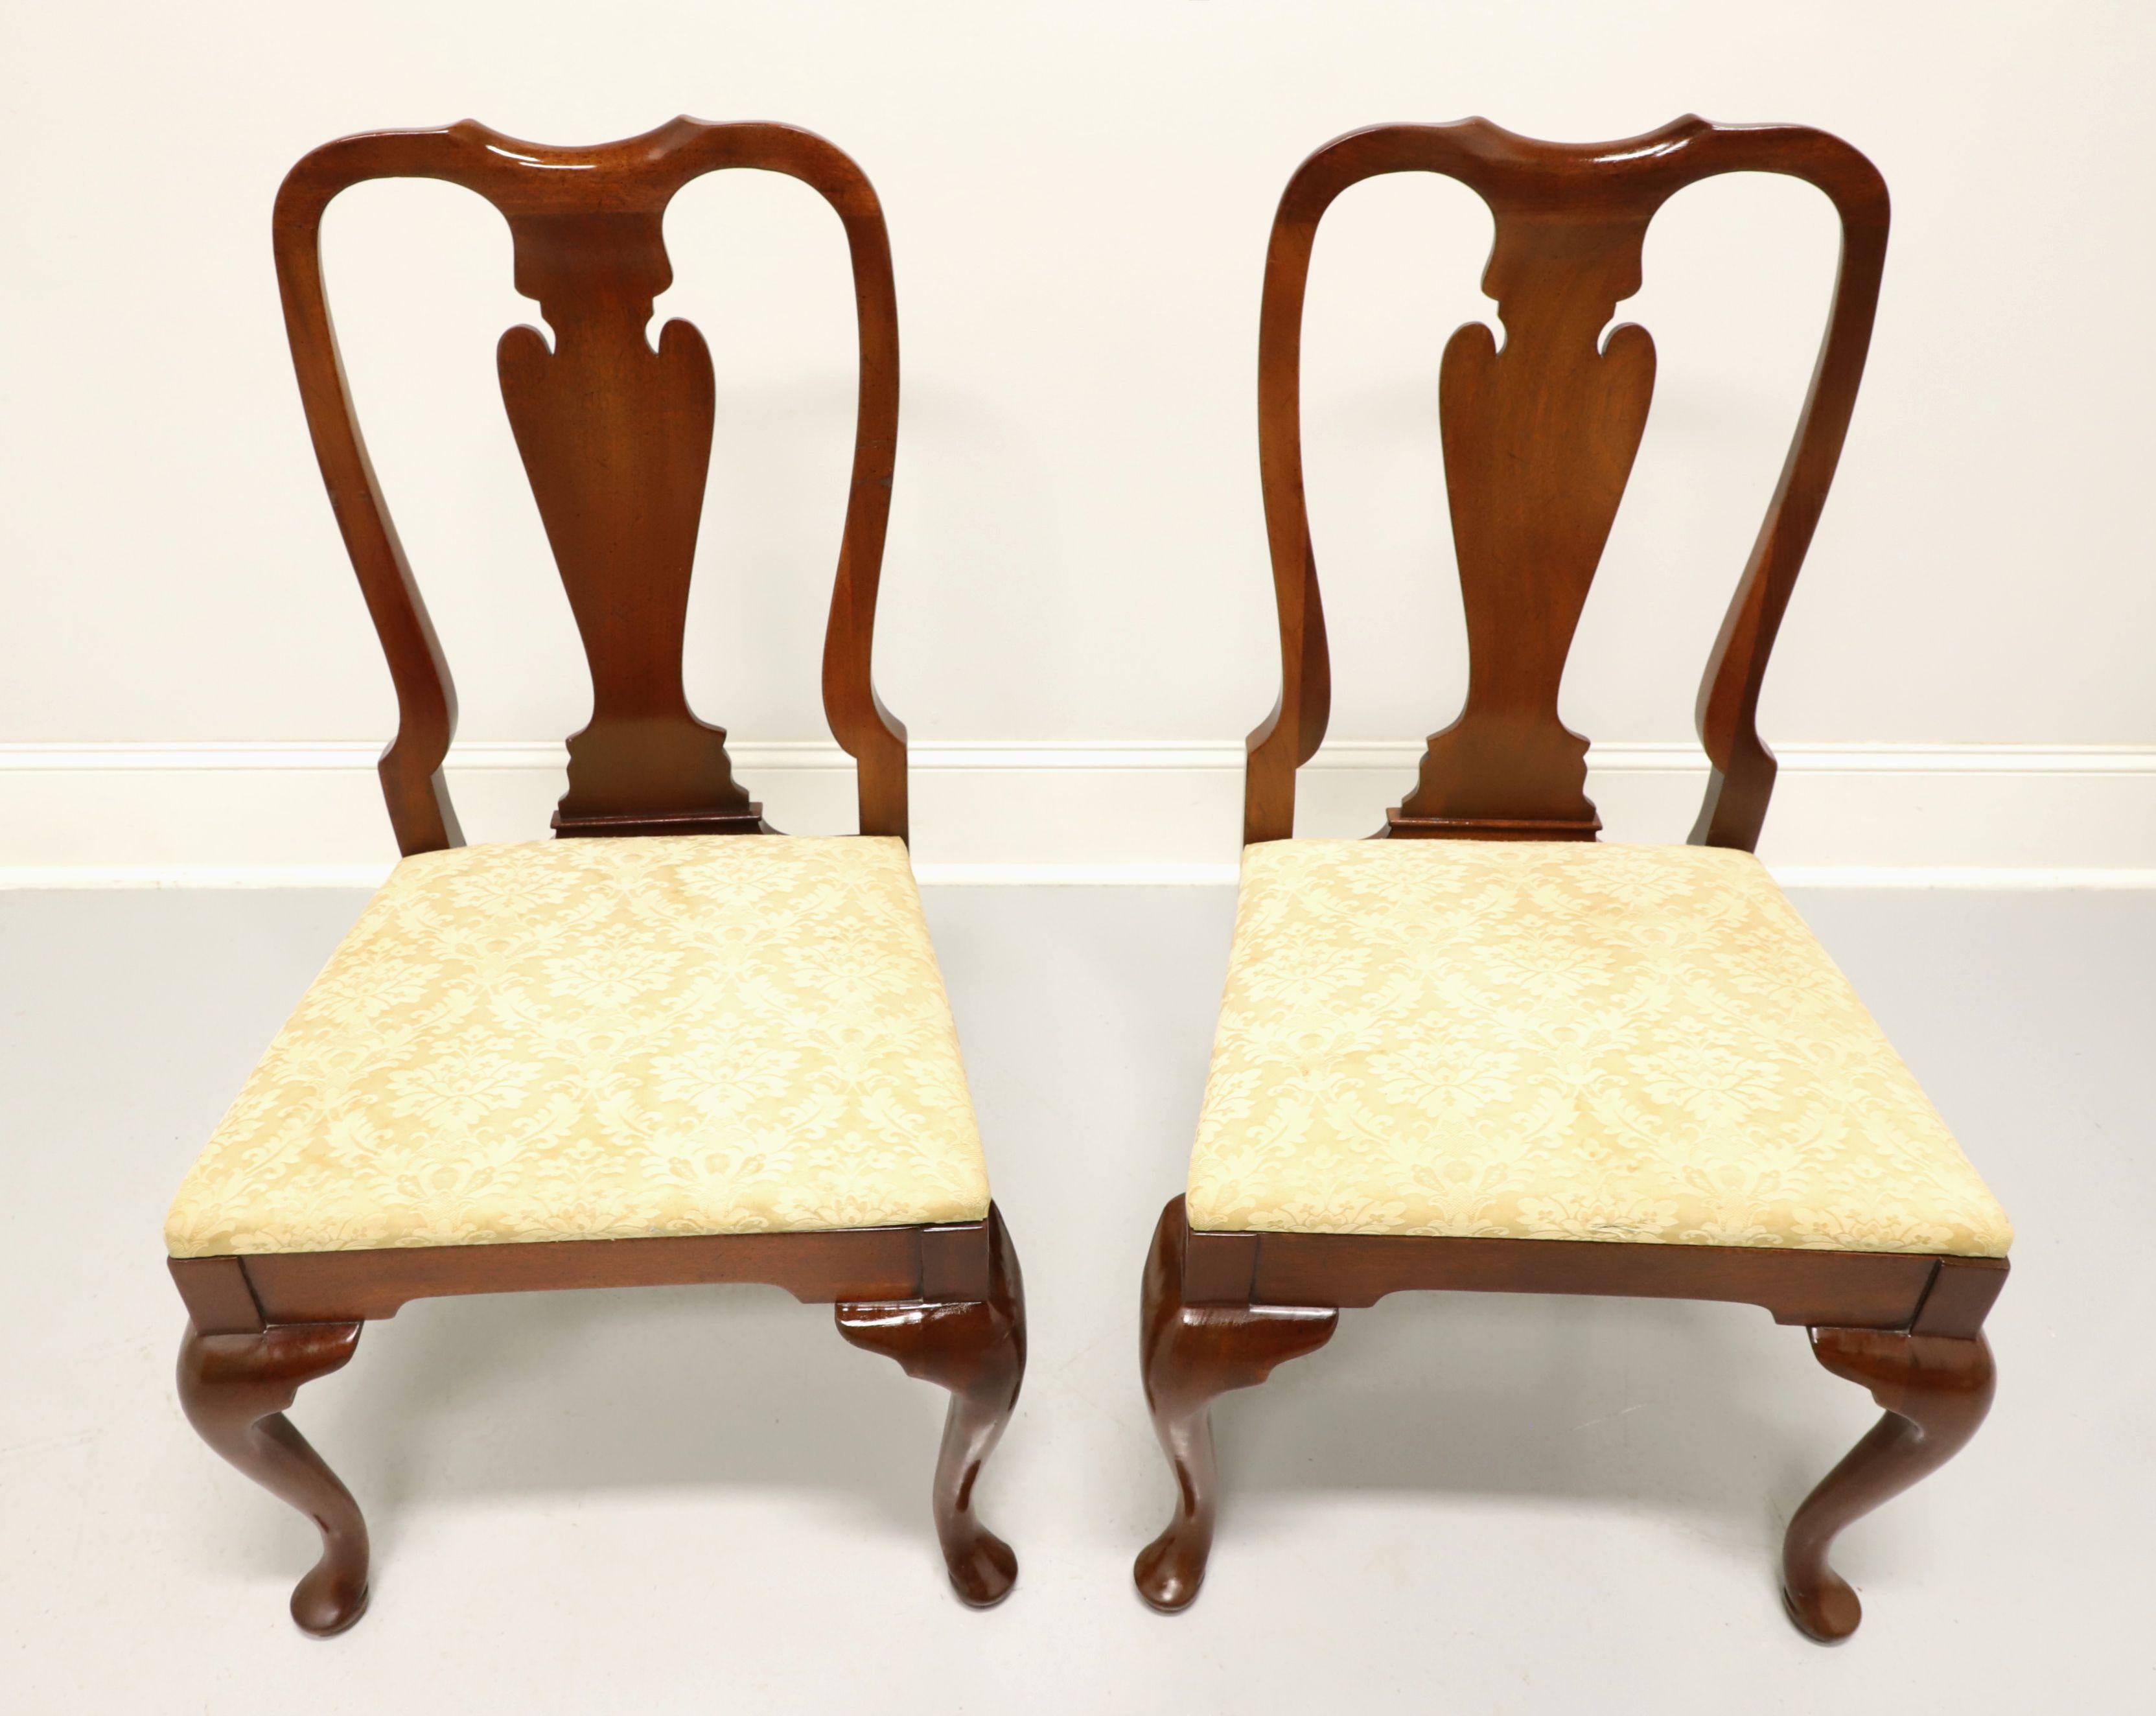 A pair of Queen Anne style dining side chairs by top quality furniture maker, Hickory Chair Company. Solid mahogany with their Amber Mahogany finish, carved back rest, creamy gold color brocade fabric upholstered seat, cabriole front legs and pad